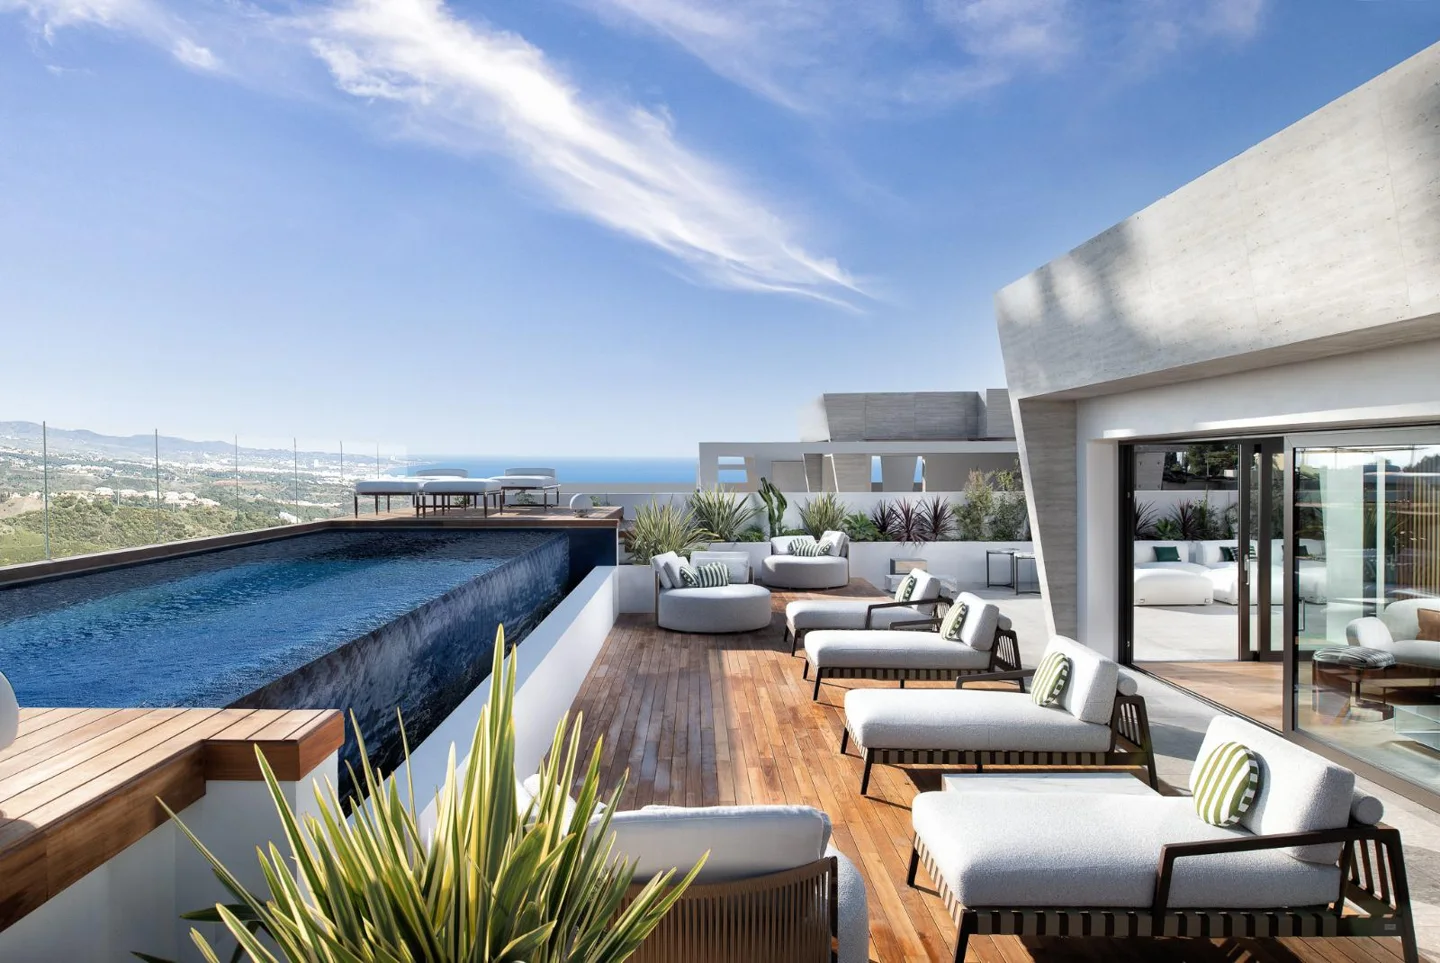 The most luxurious apartment resort built in cooperation with "Fendi Casa" on the Golden Mile